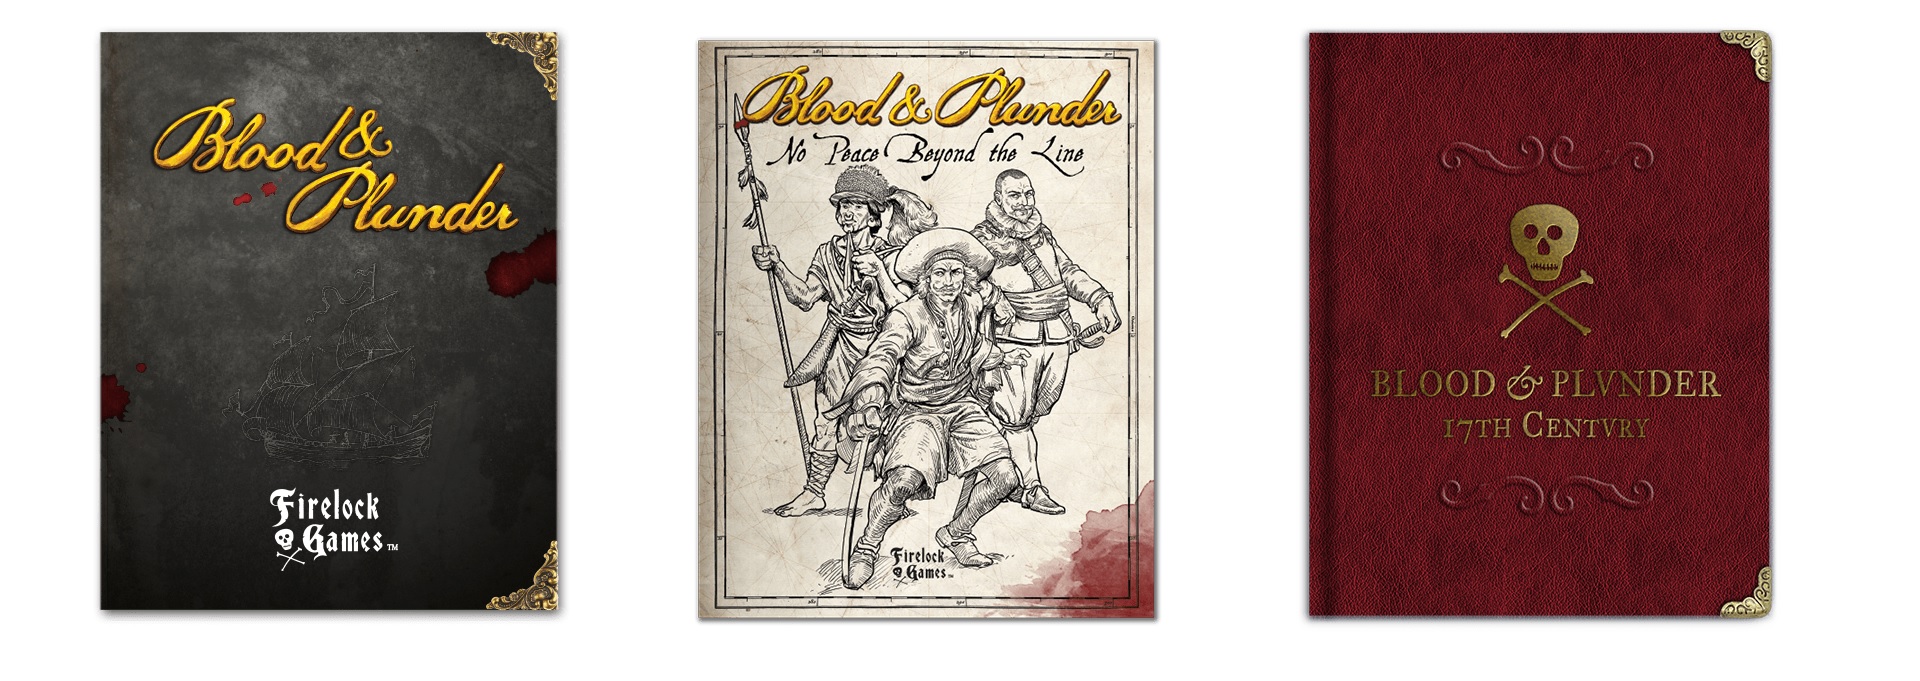 for sale online 2018, Hardcover Blood and Plunder No Peace Beyond the Line by Firelock Games